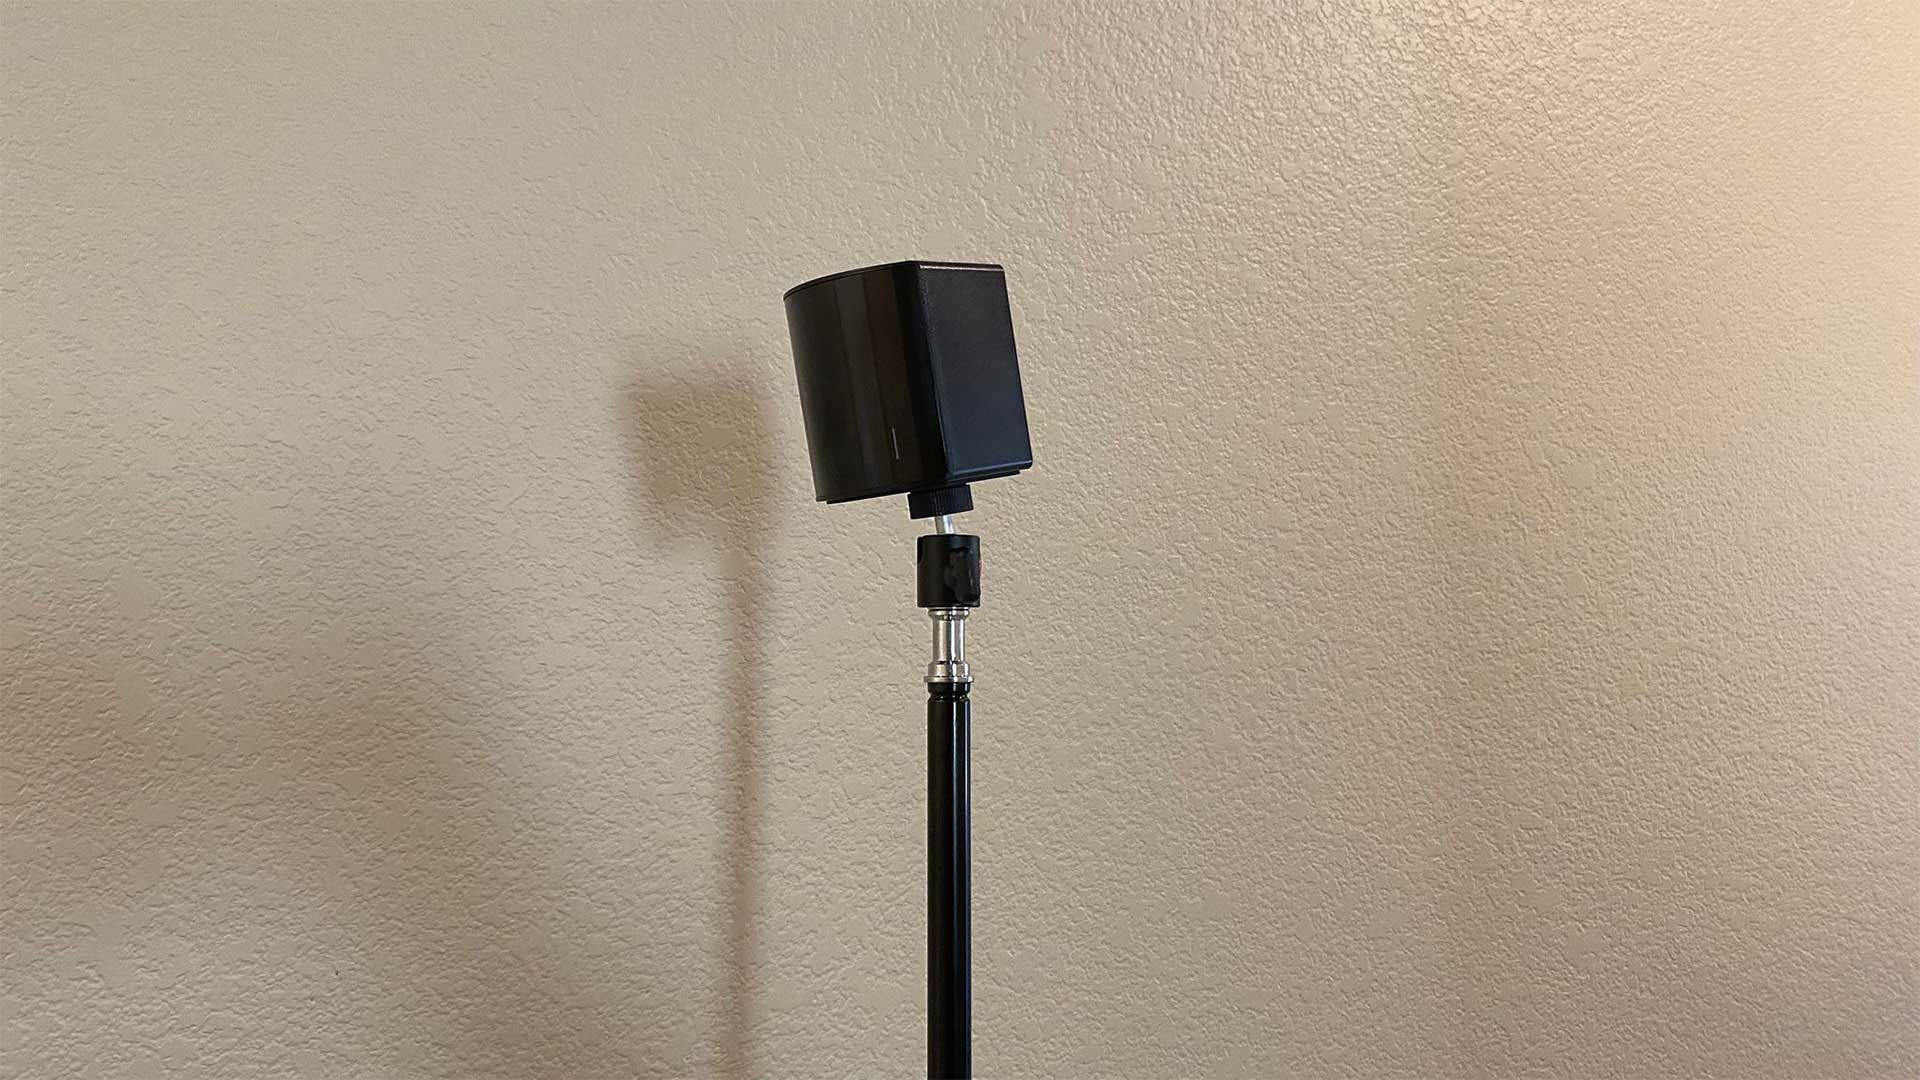 SteamVR base station 2.0 perched on a tripod showing the height requirement.